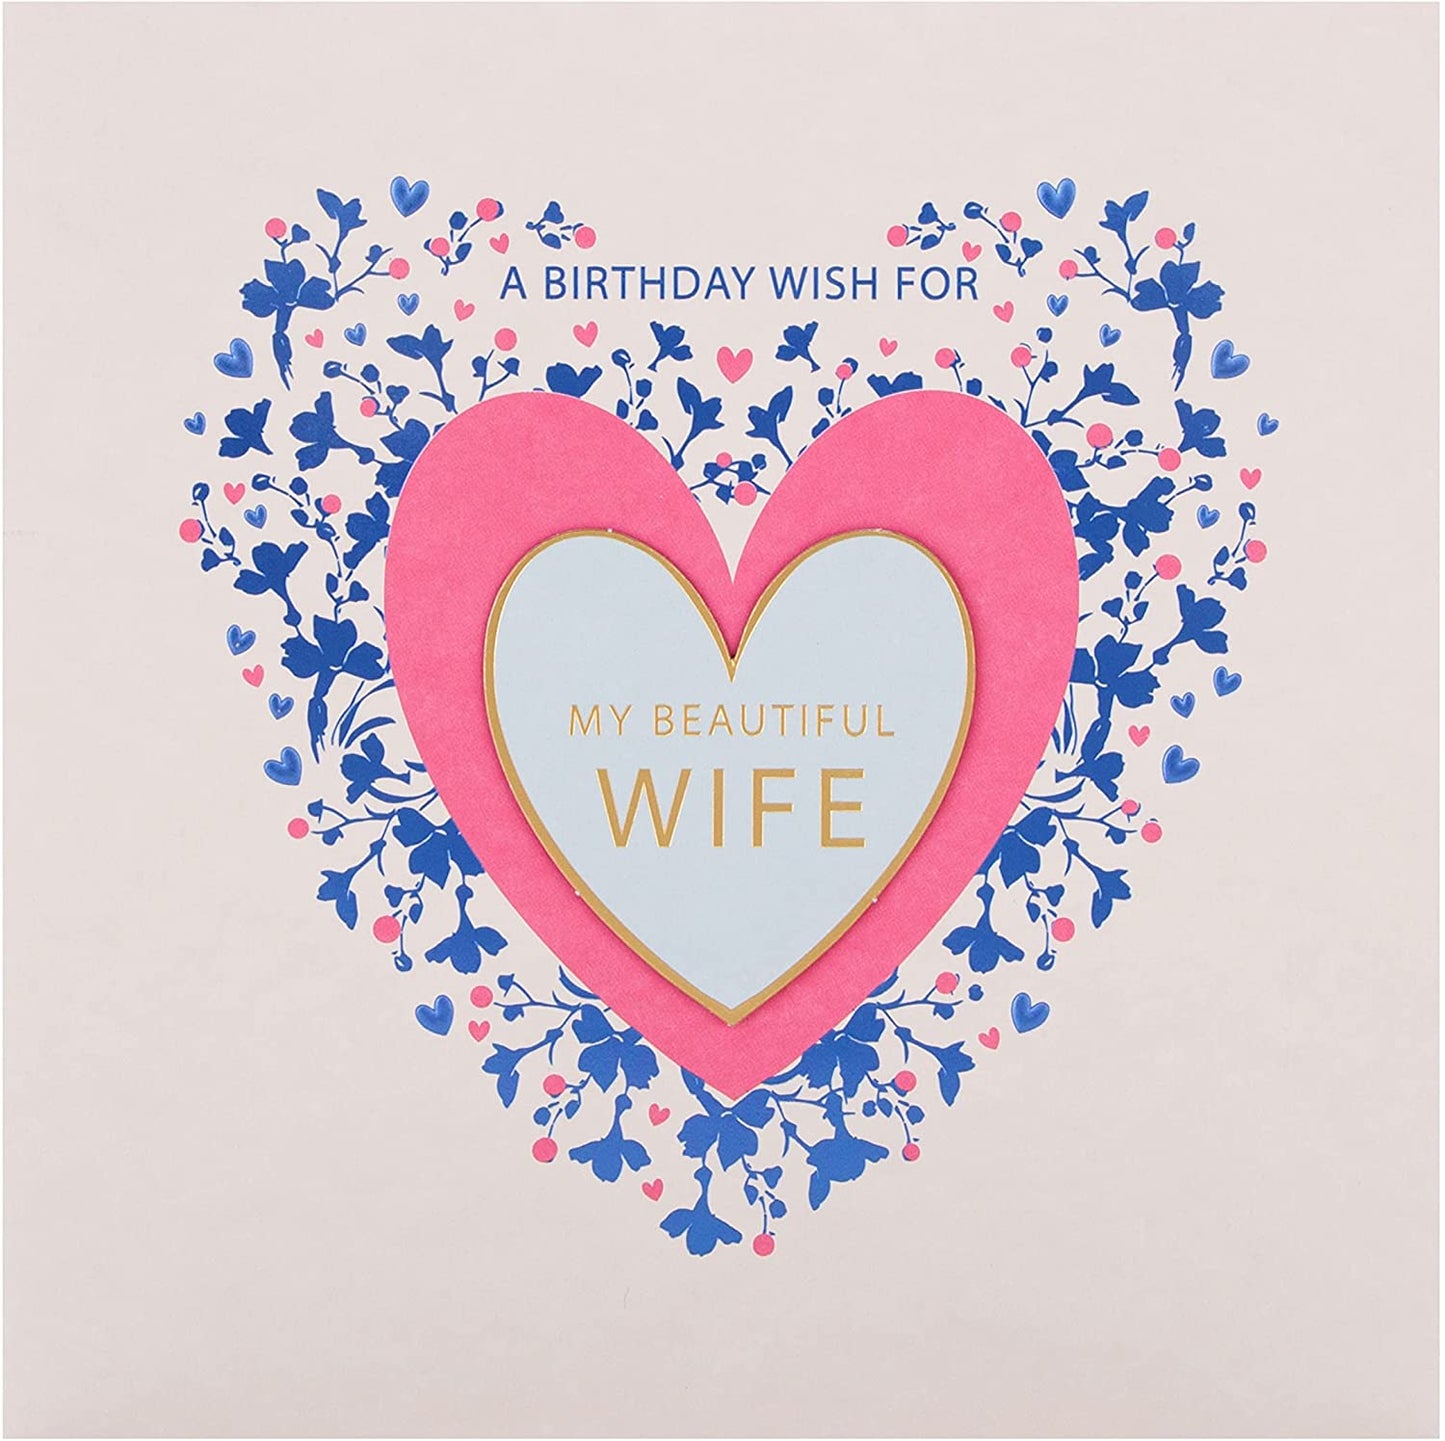 Contemporary Love Heart Design Large Birthday Card for Wife